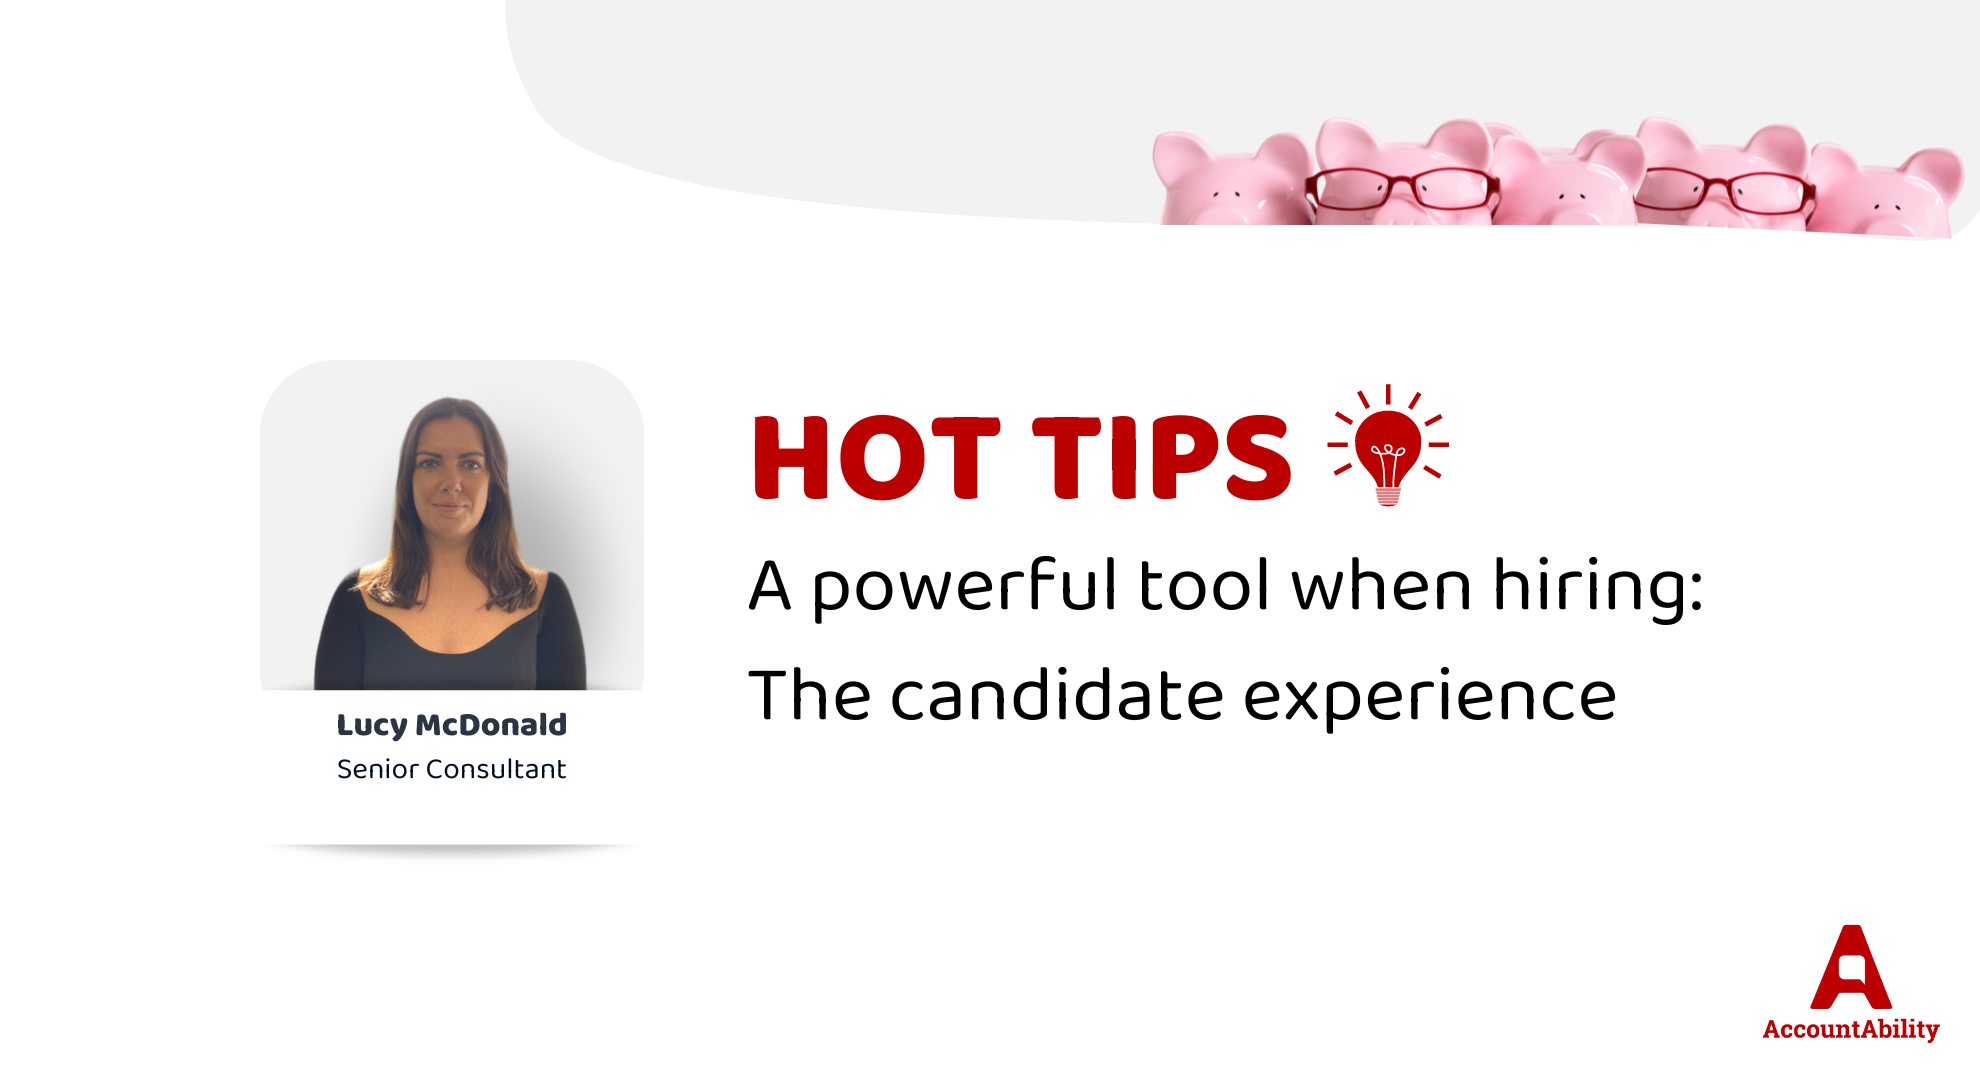 A powerful tool when hiring: The candidate experience